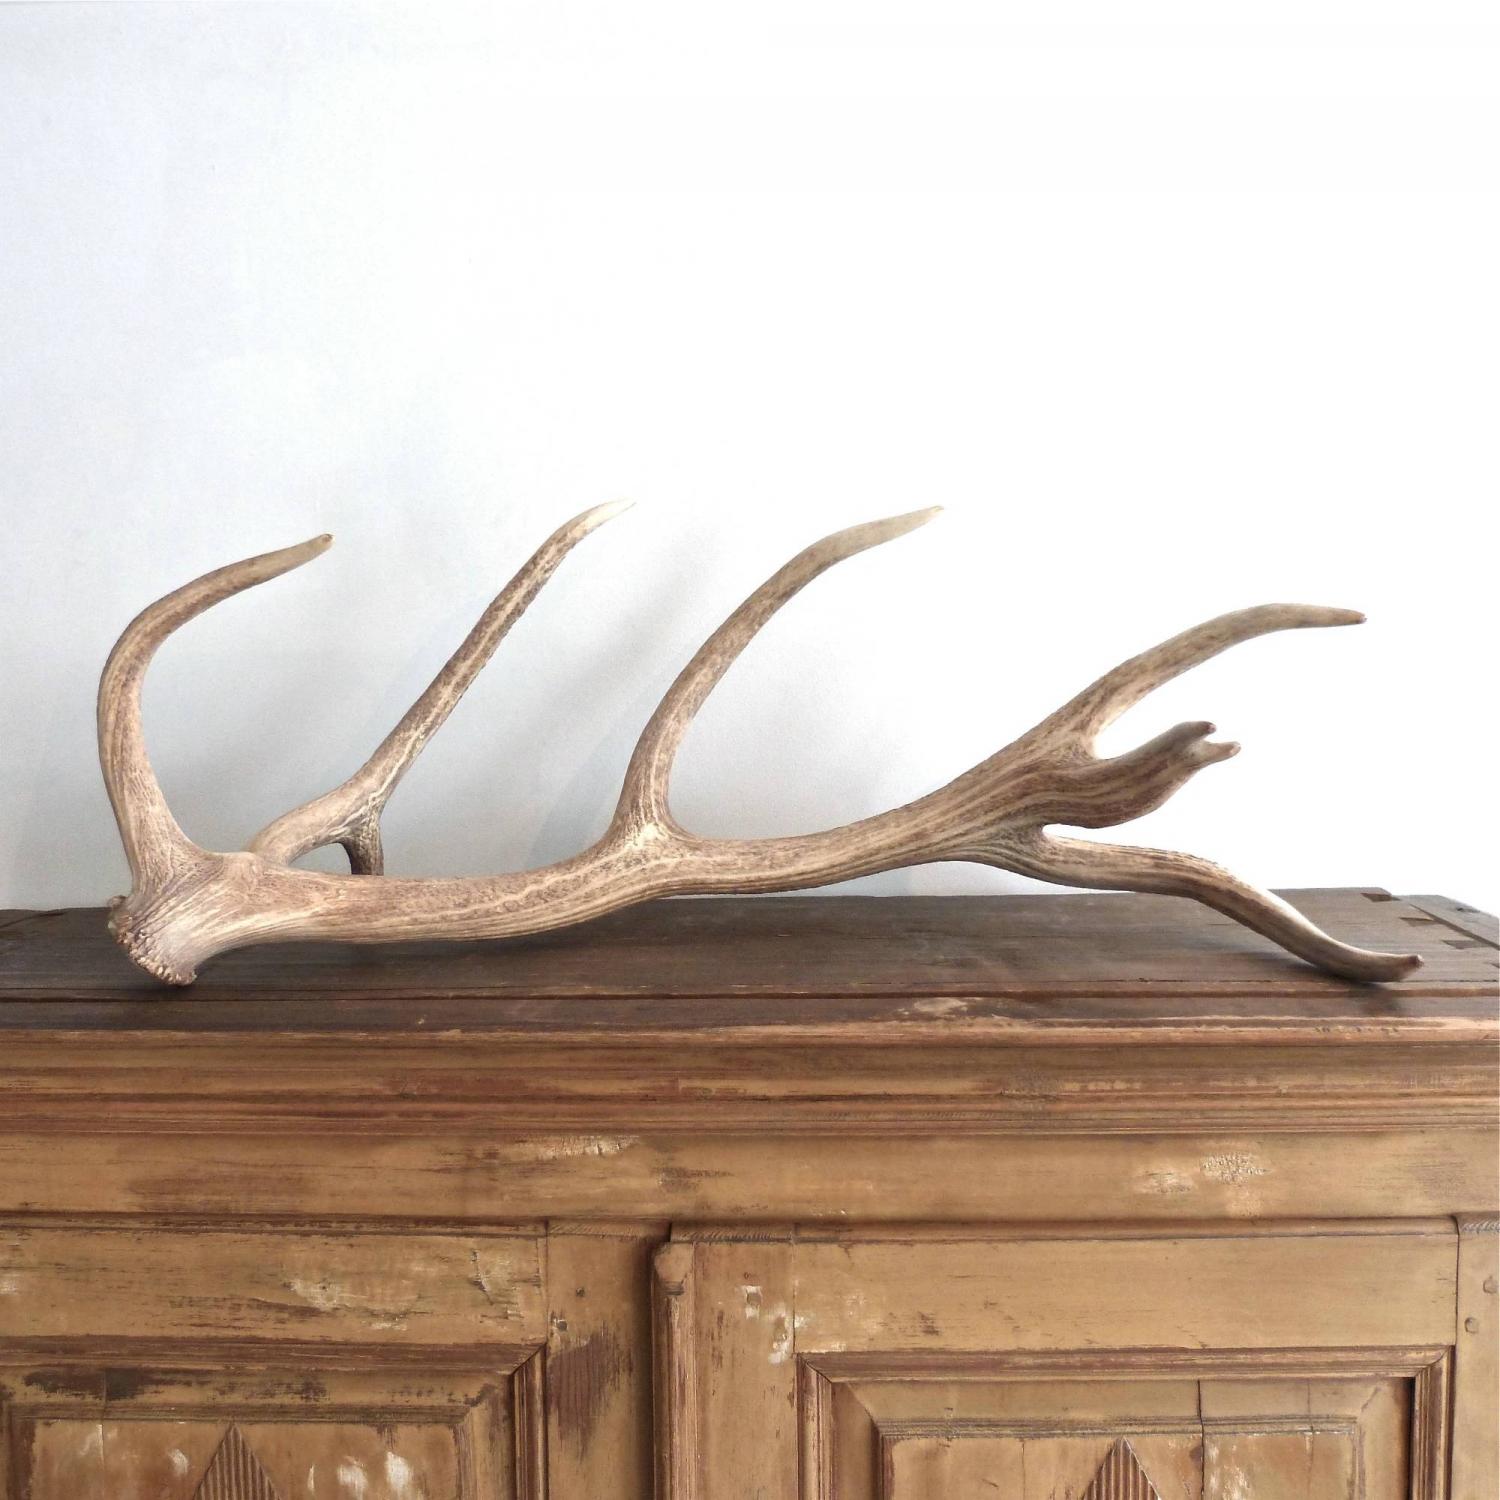 VERY LARGE & IMPRESSIVE BLEACHED RED STAG ANTLER